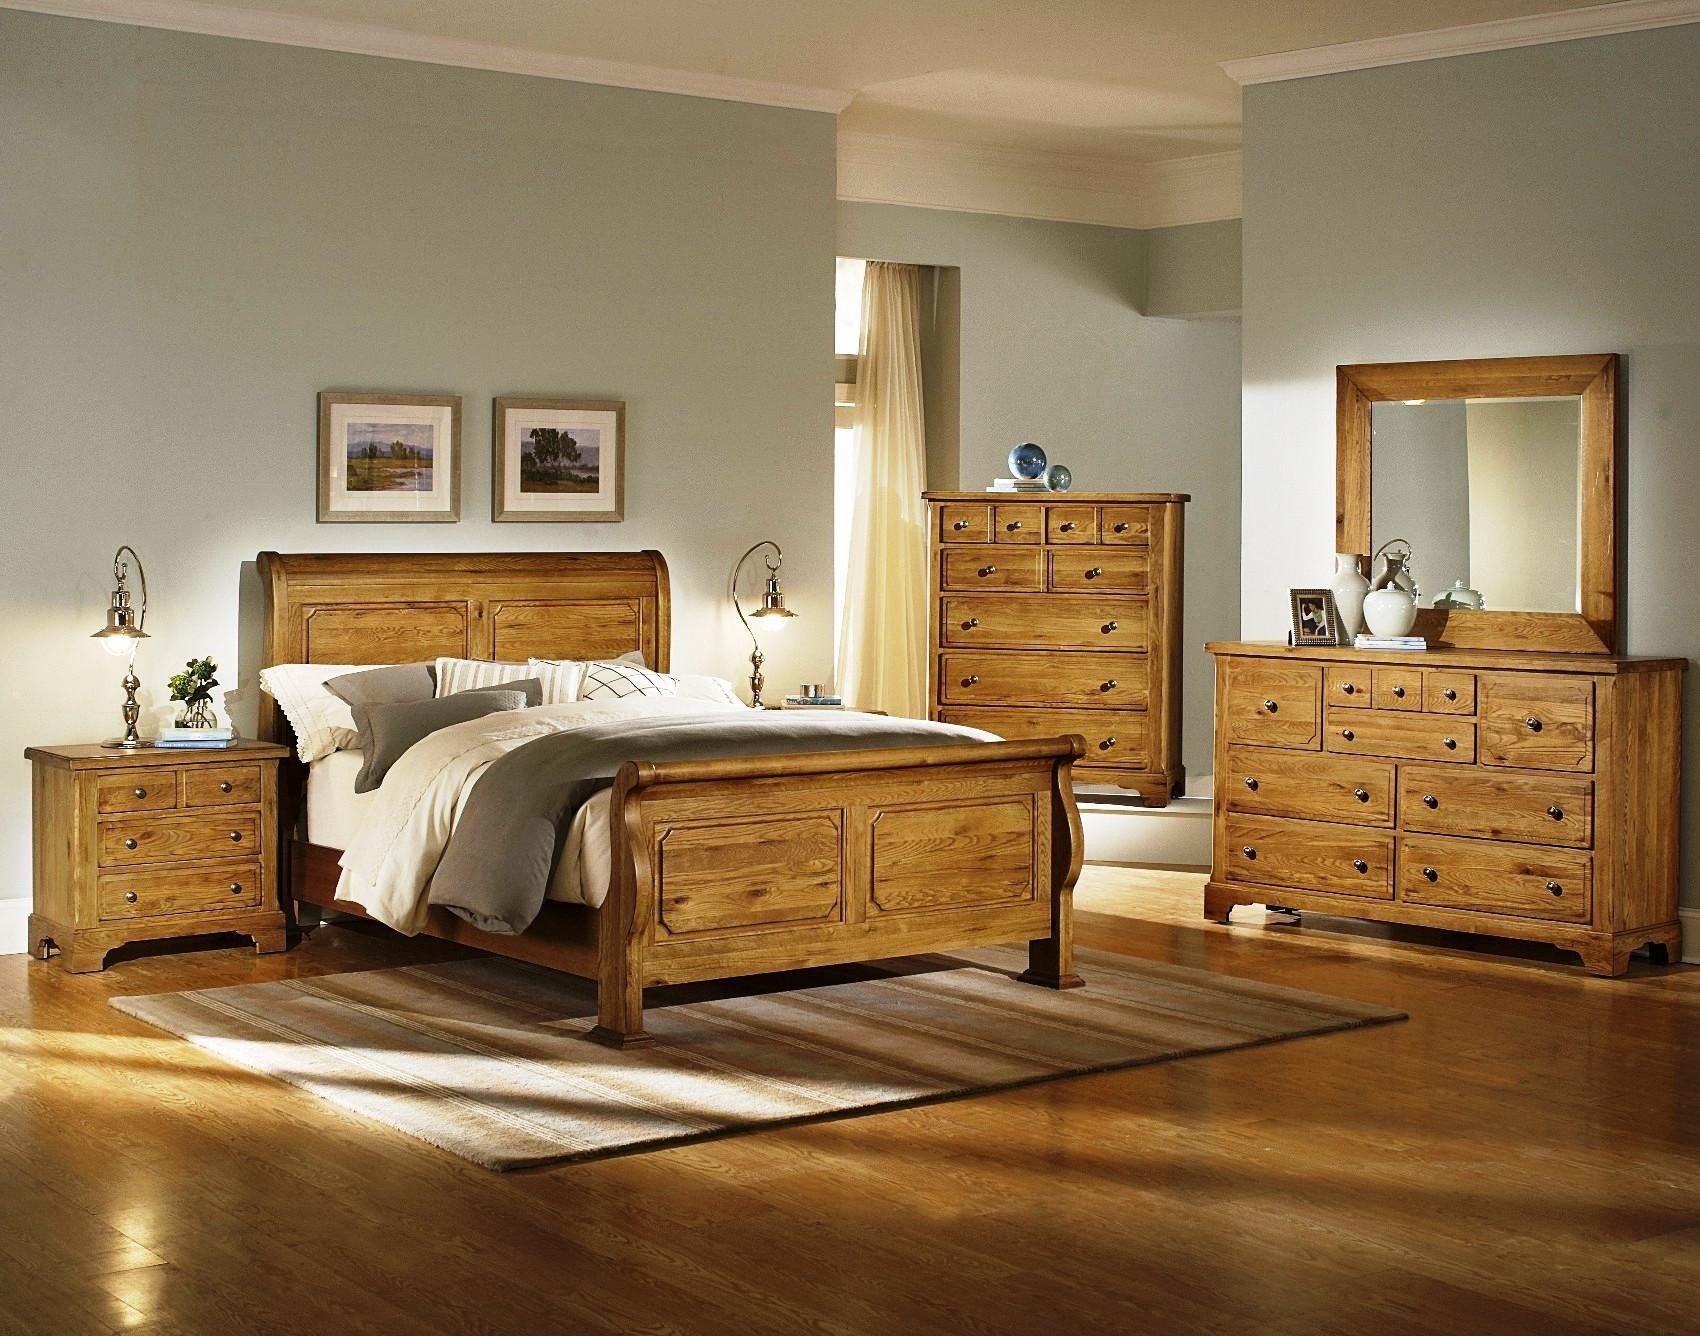 Oak Furniture With Other Materials